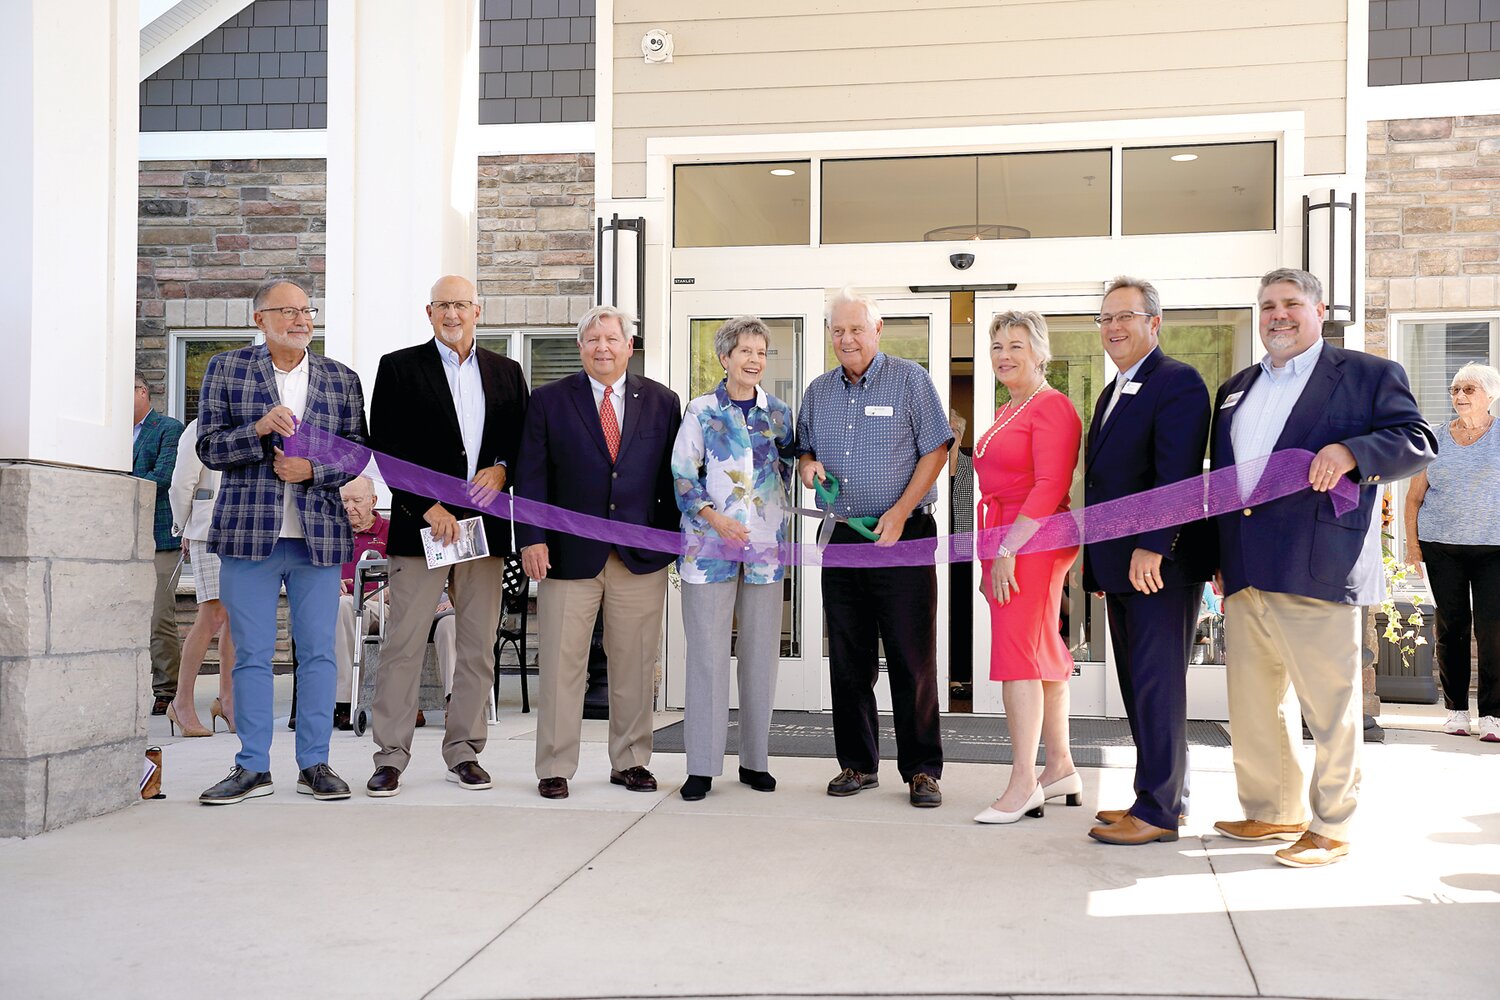 A ribbon-cutting ceremony in front of the Pine Run Village Community Center is attended by The Villagers (residents of Pine Run Village), board members from Doylestown Health, PSL board members, and leadership teams from both PSL and Pine Run Village.